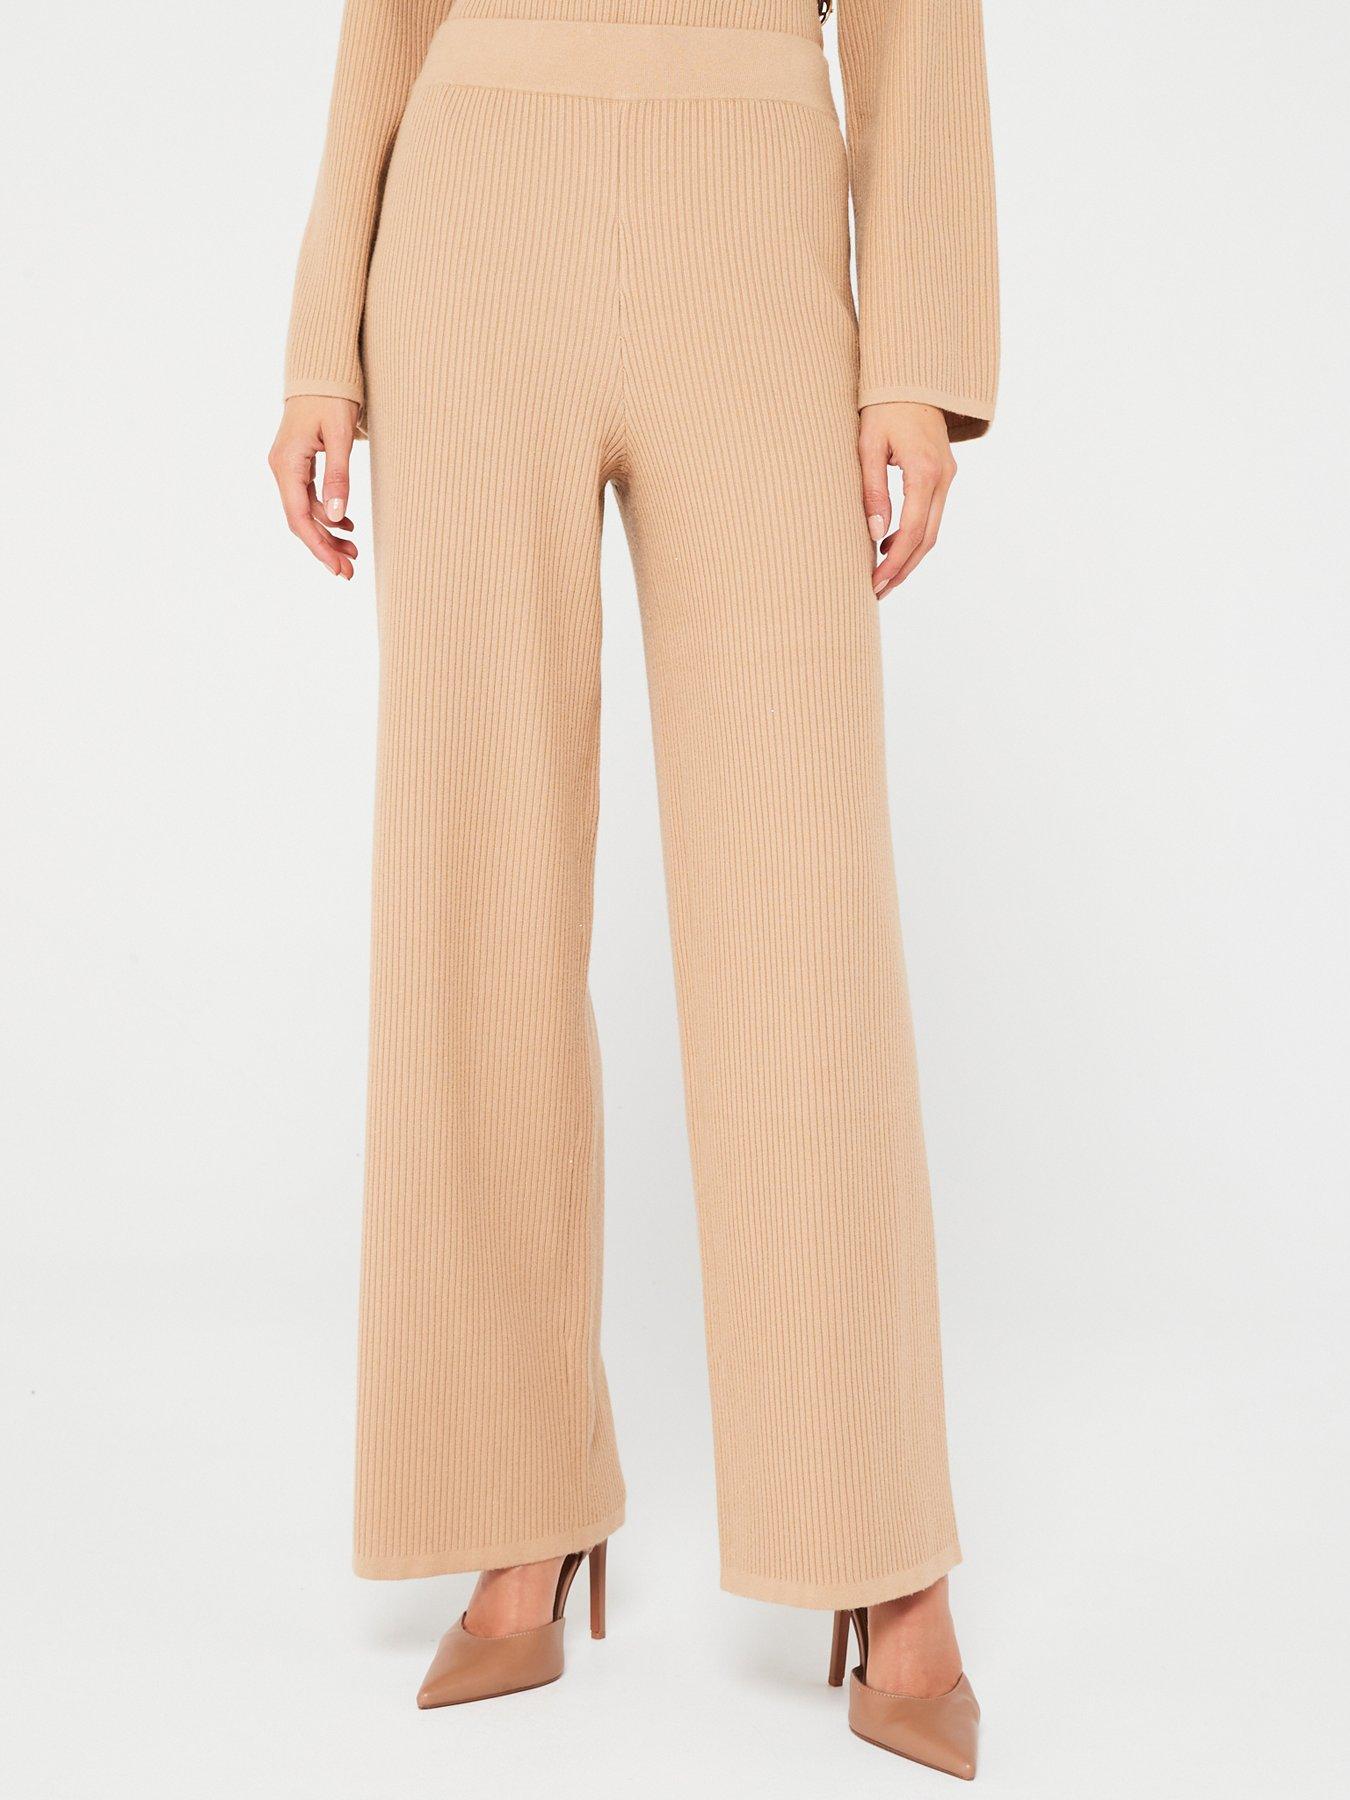 River Island ribbed knit co-ord leggings in beige